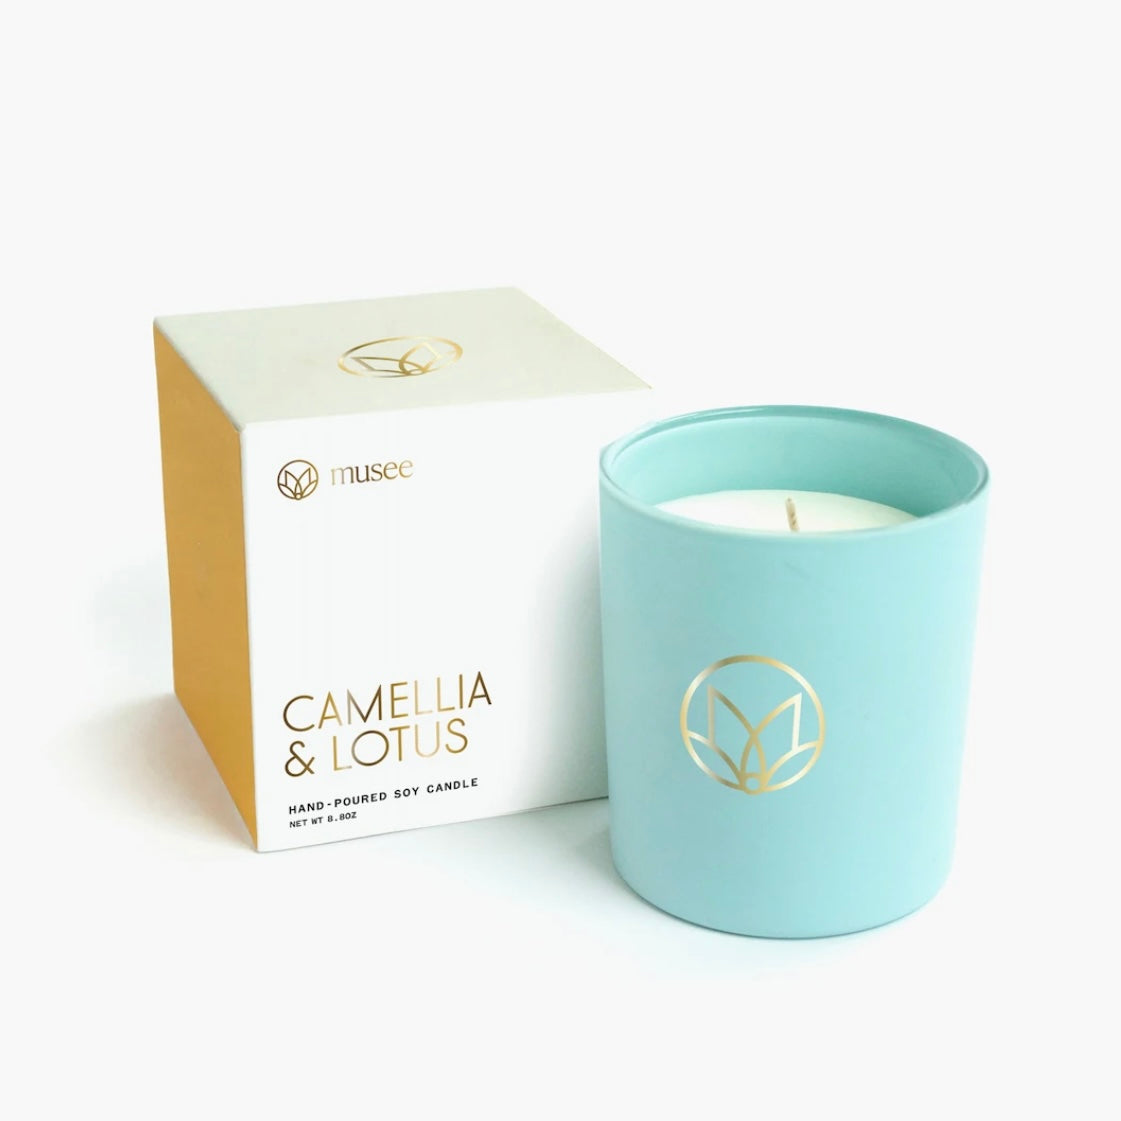 Musee Camellia & Lotus Candle